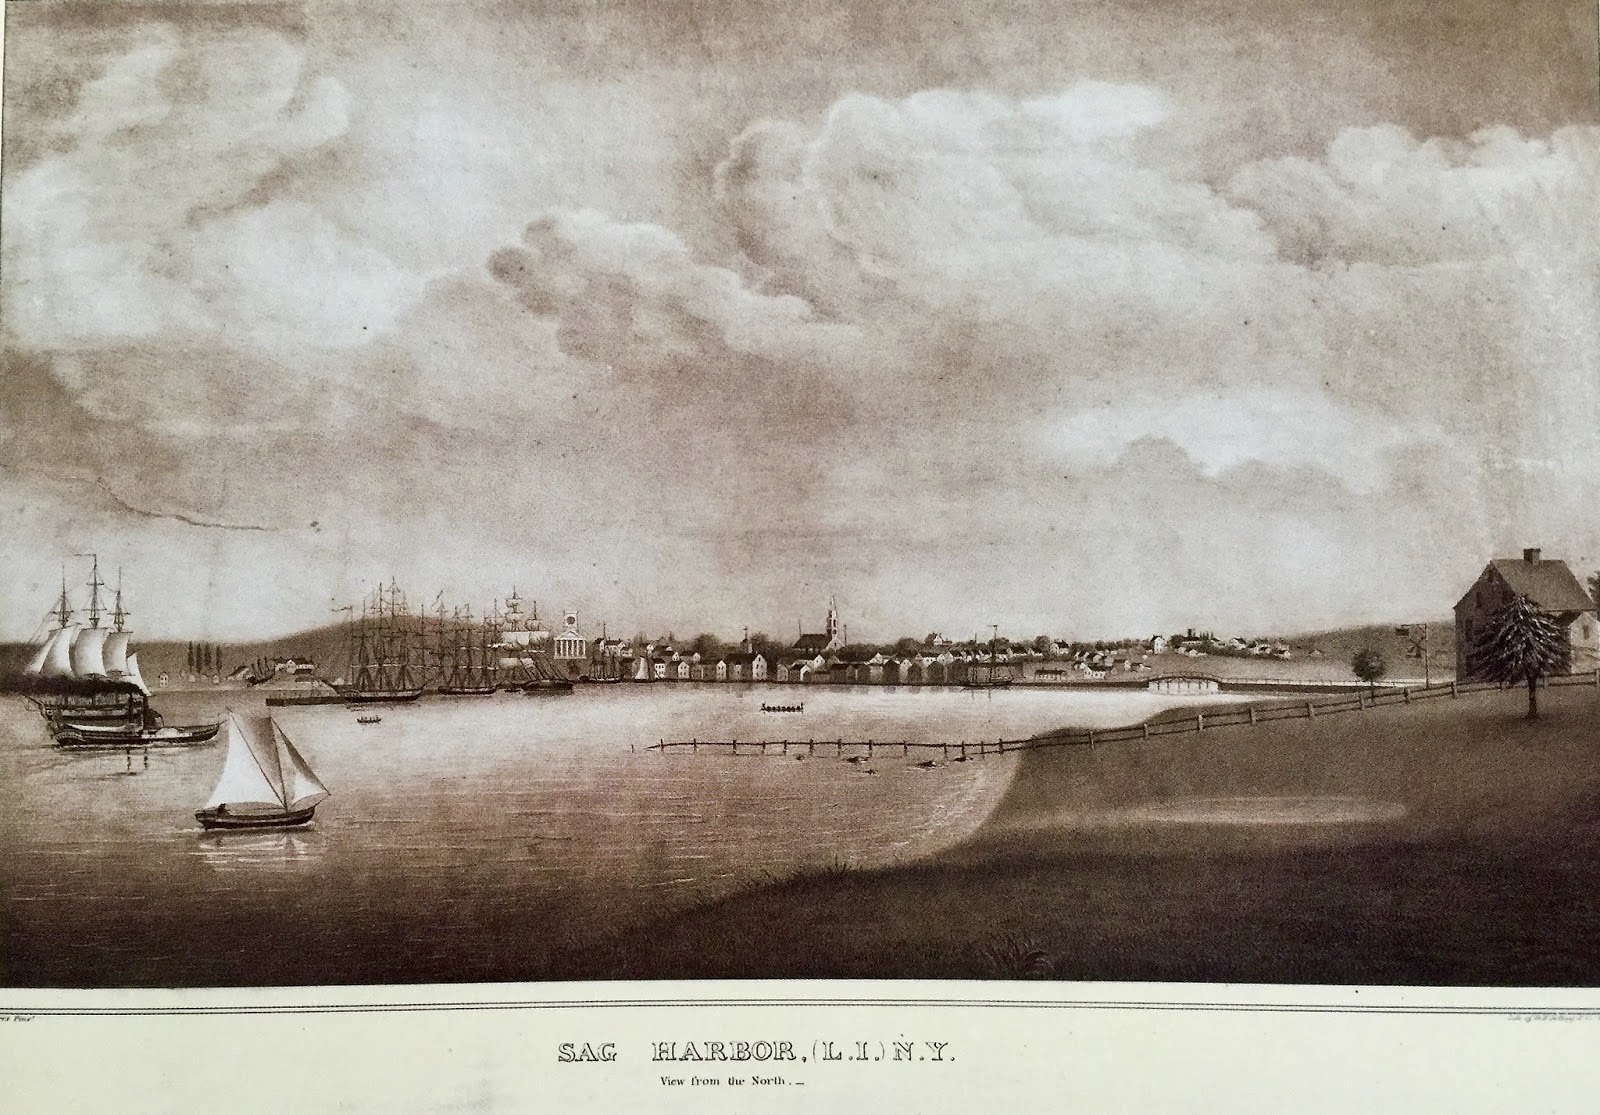 An 18th century view of Sag Harbor painted by local artist Orlando Hand Bears in 1840.